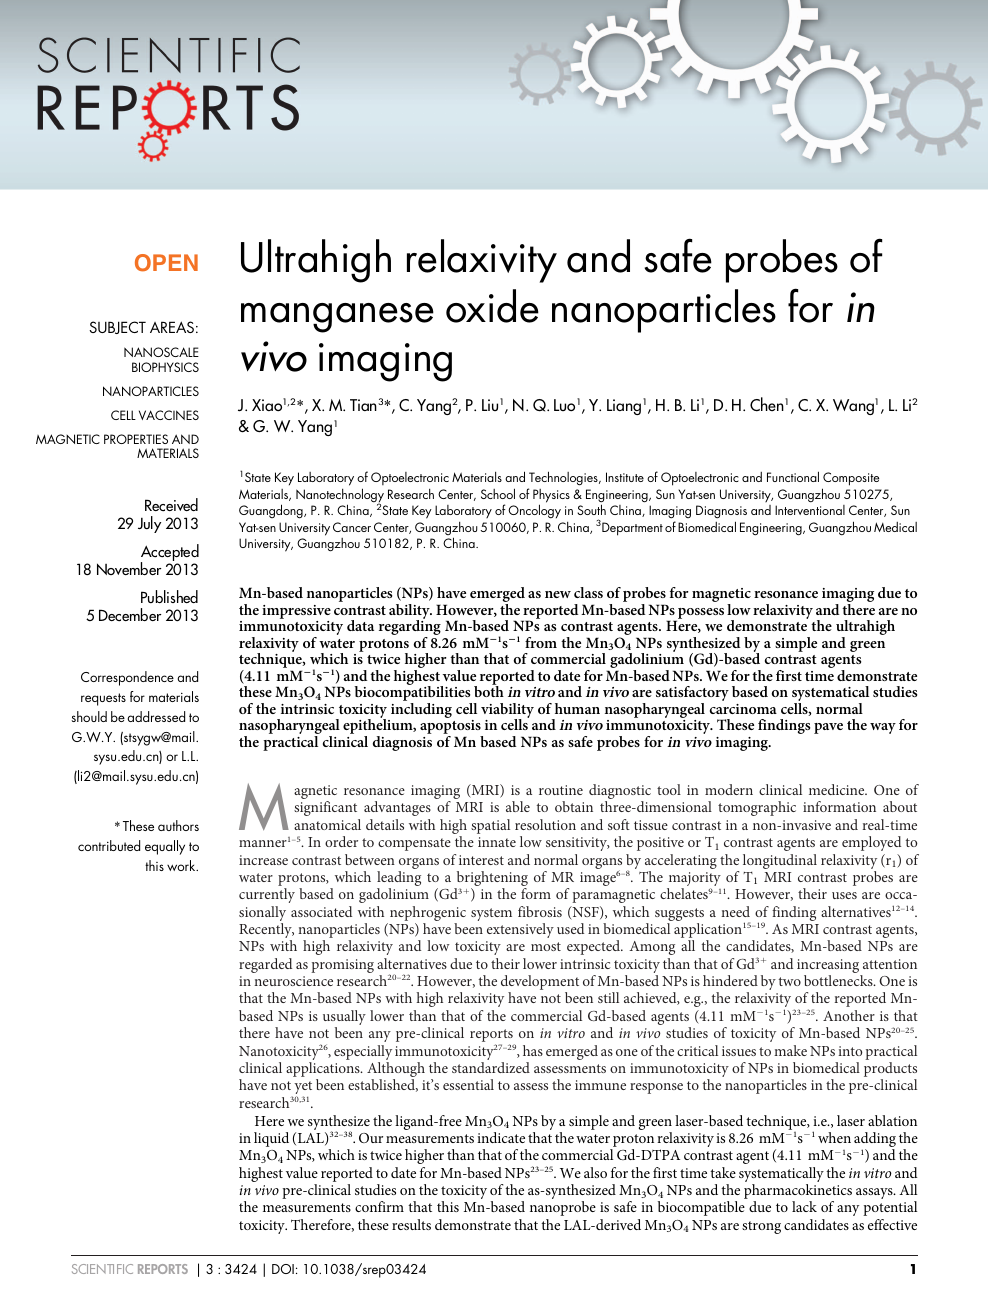 Ultrahigh Relaxivity And Safe Probes Of Manganese Oxide Nanoparticles For In Vivo Imaging Topic Of Research Paper In Nano Technology Download Scholarly Article Pdf And Read For Free On Cyberleninka Open Science